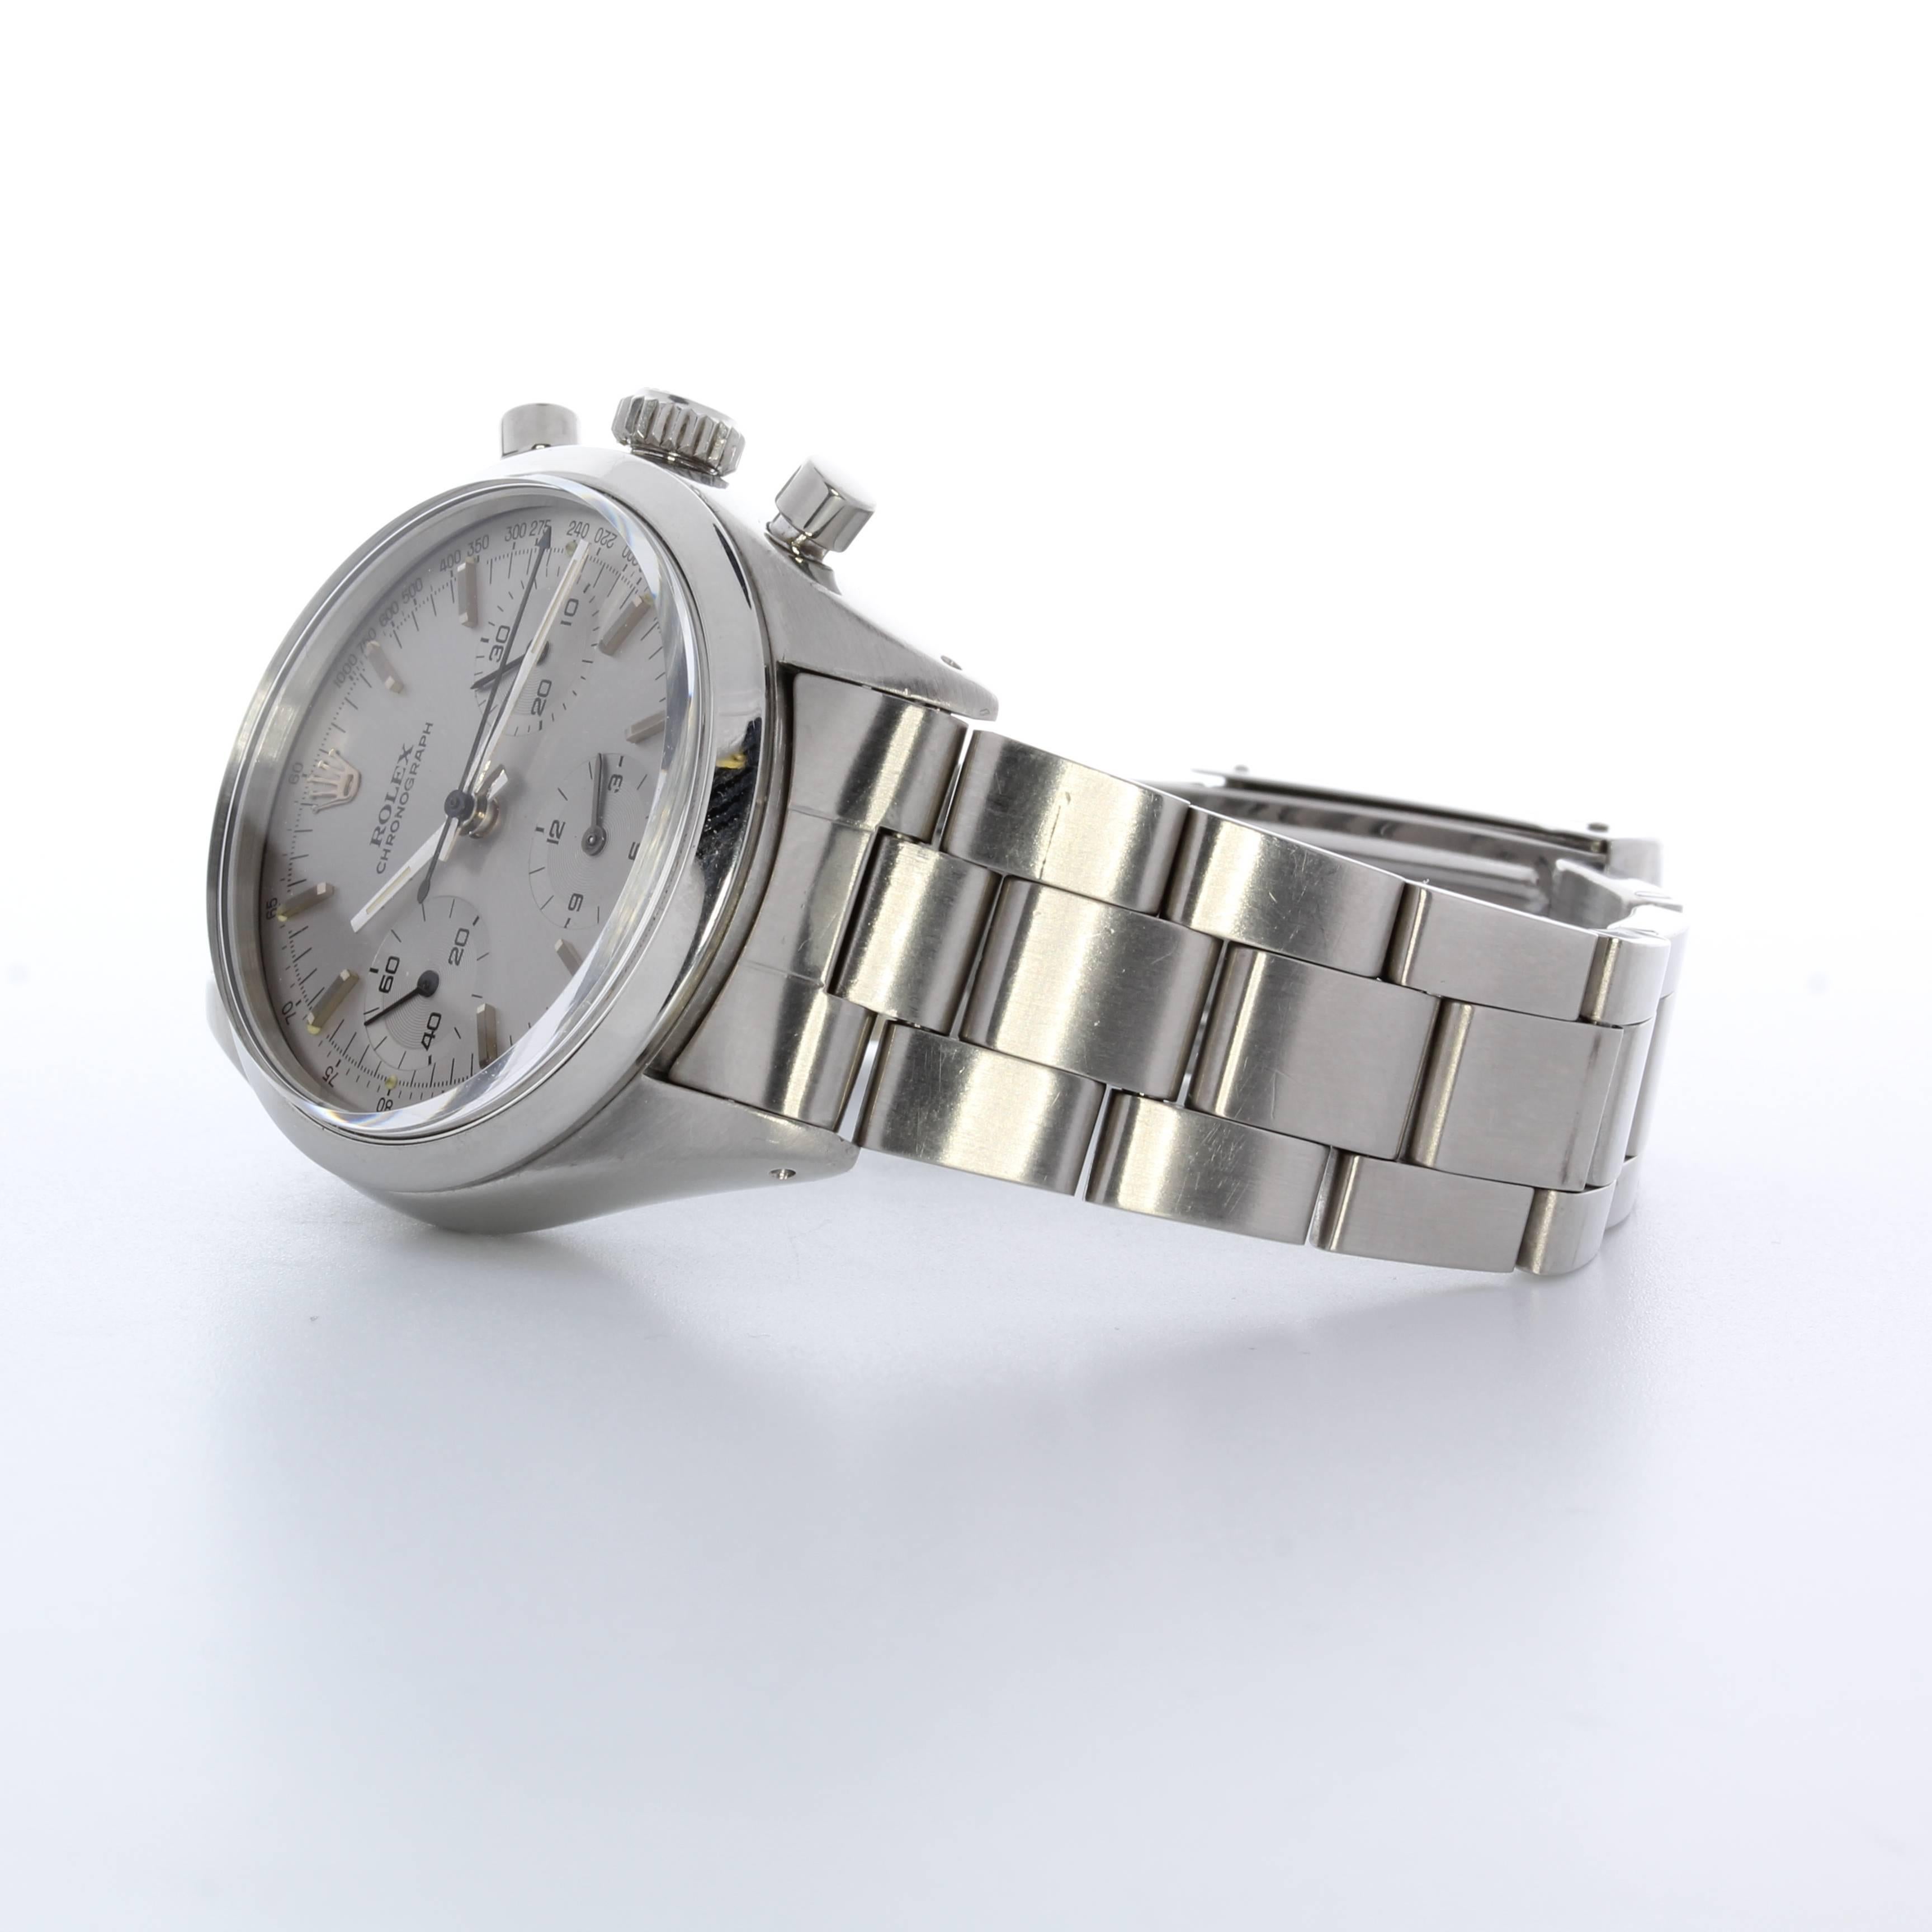 Rolex stainless steel ref. 6238, ca 1964 chronograph, Pre Daytona. Tachymeter calibrated to 1000 units, oyster bracelet. The reference 6238 is known as the “Pre-Daytona.” Historically, it is a very significant piece for Rolex, as it marked the